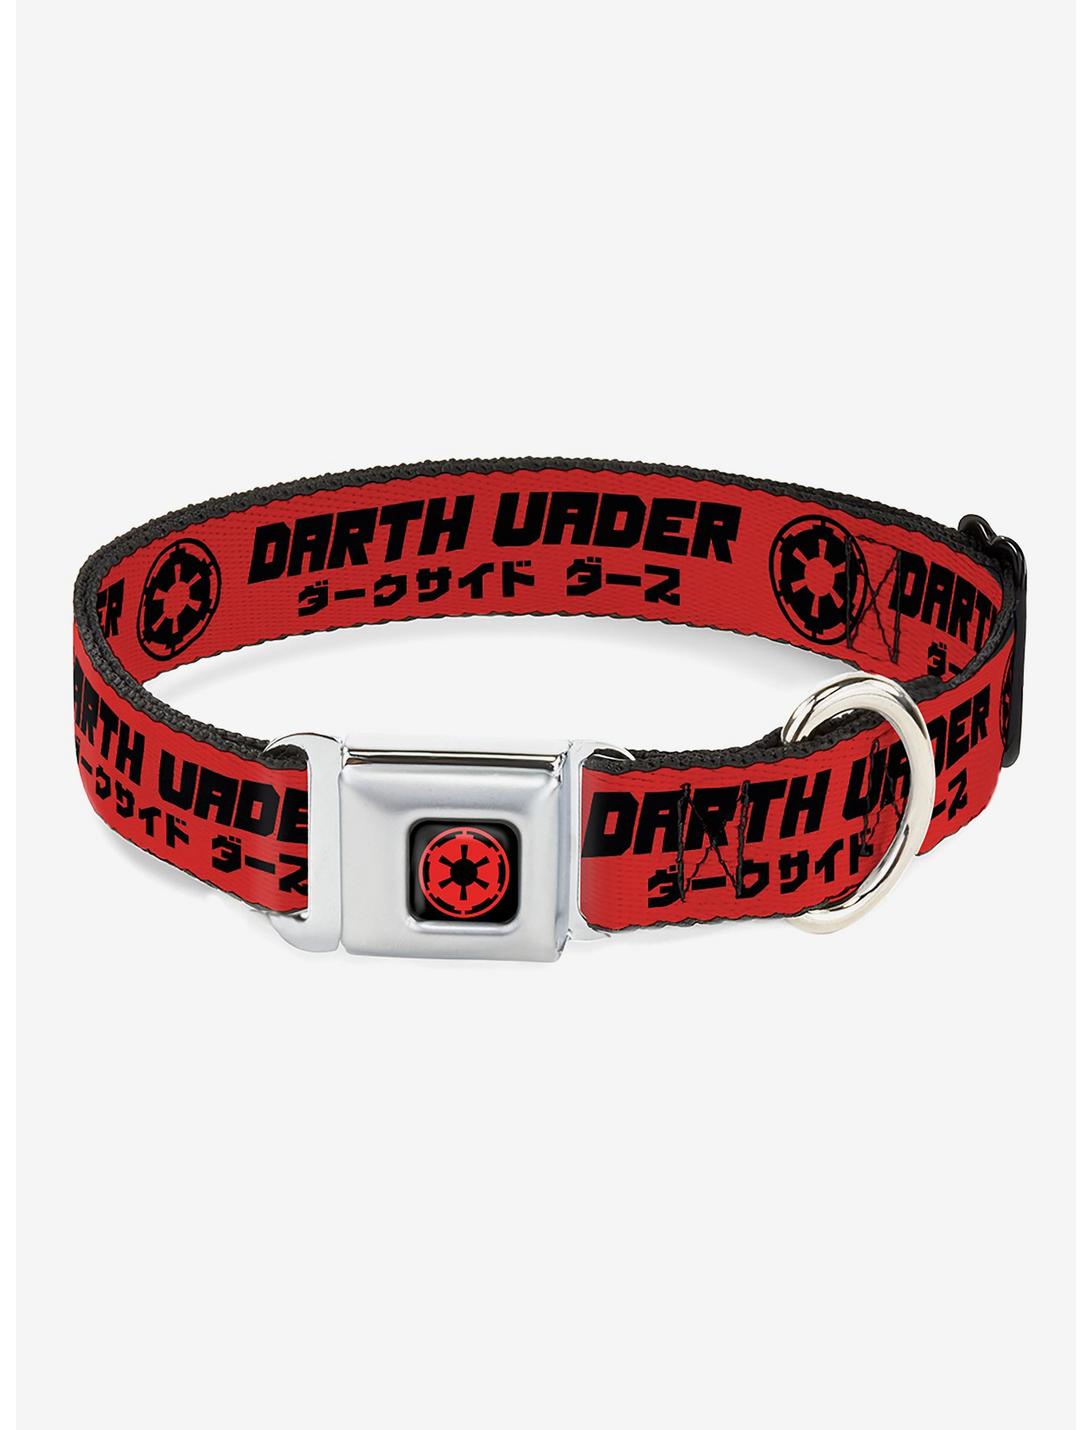 Star Wars Darth Vader Text and Galactic Empire Seatbelt Buckle Dog Collar, RED, hi-res